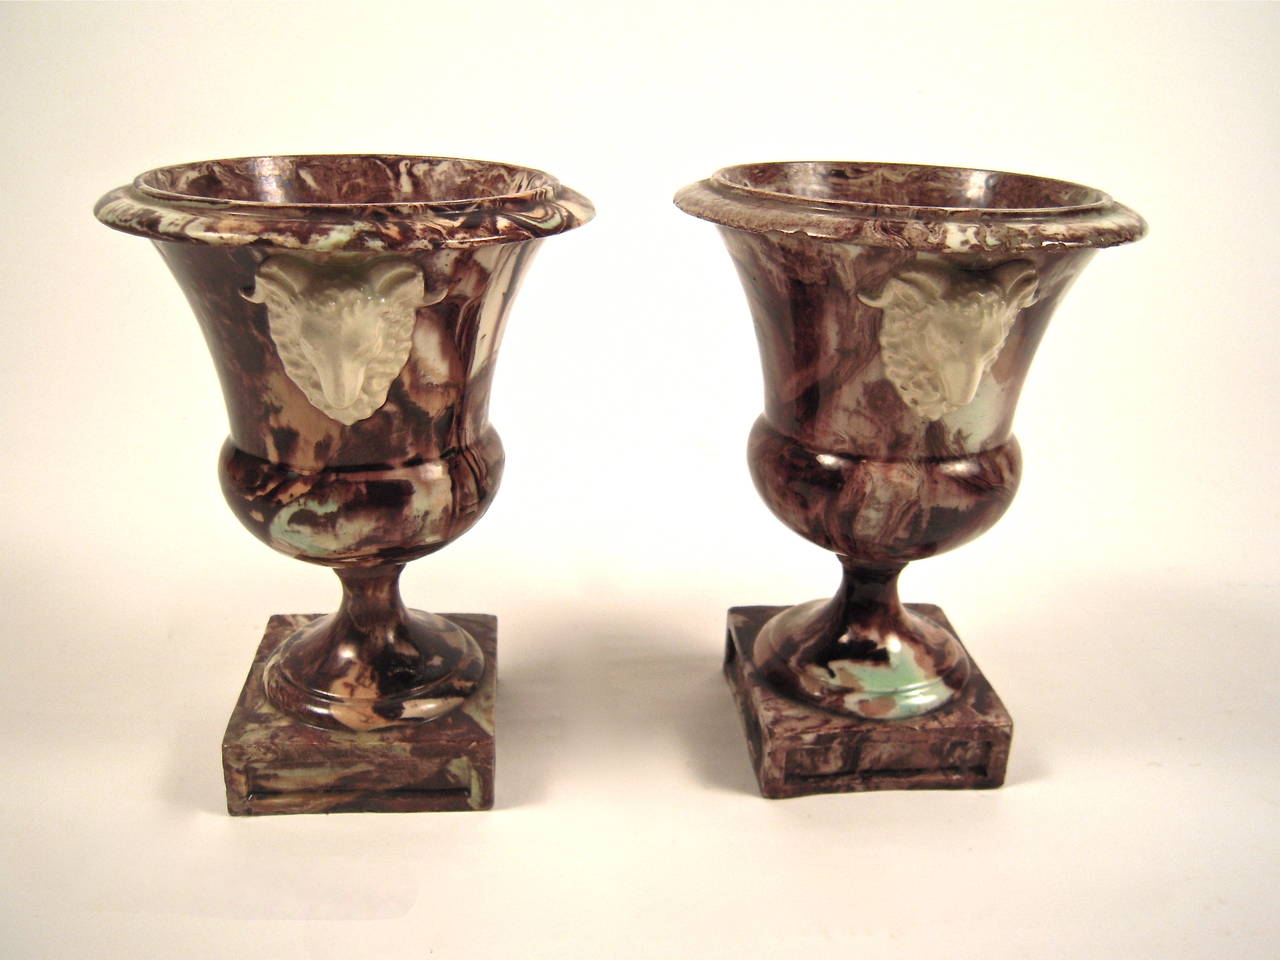 Glazed Pair of 18th Century French Agate Earthenware Urns